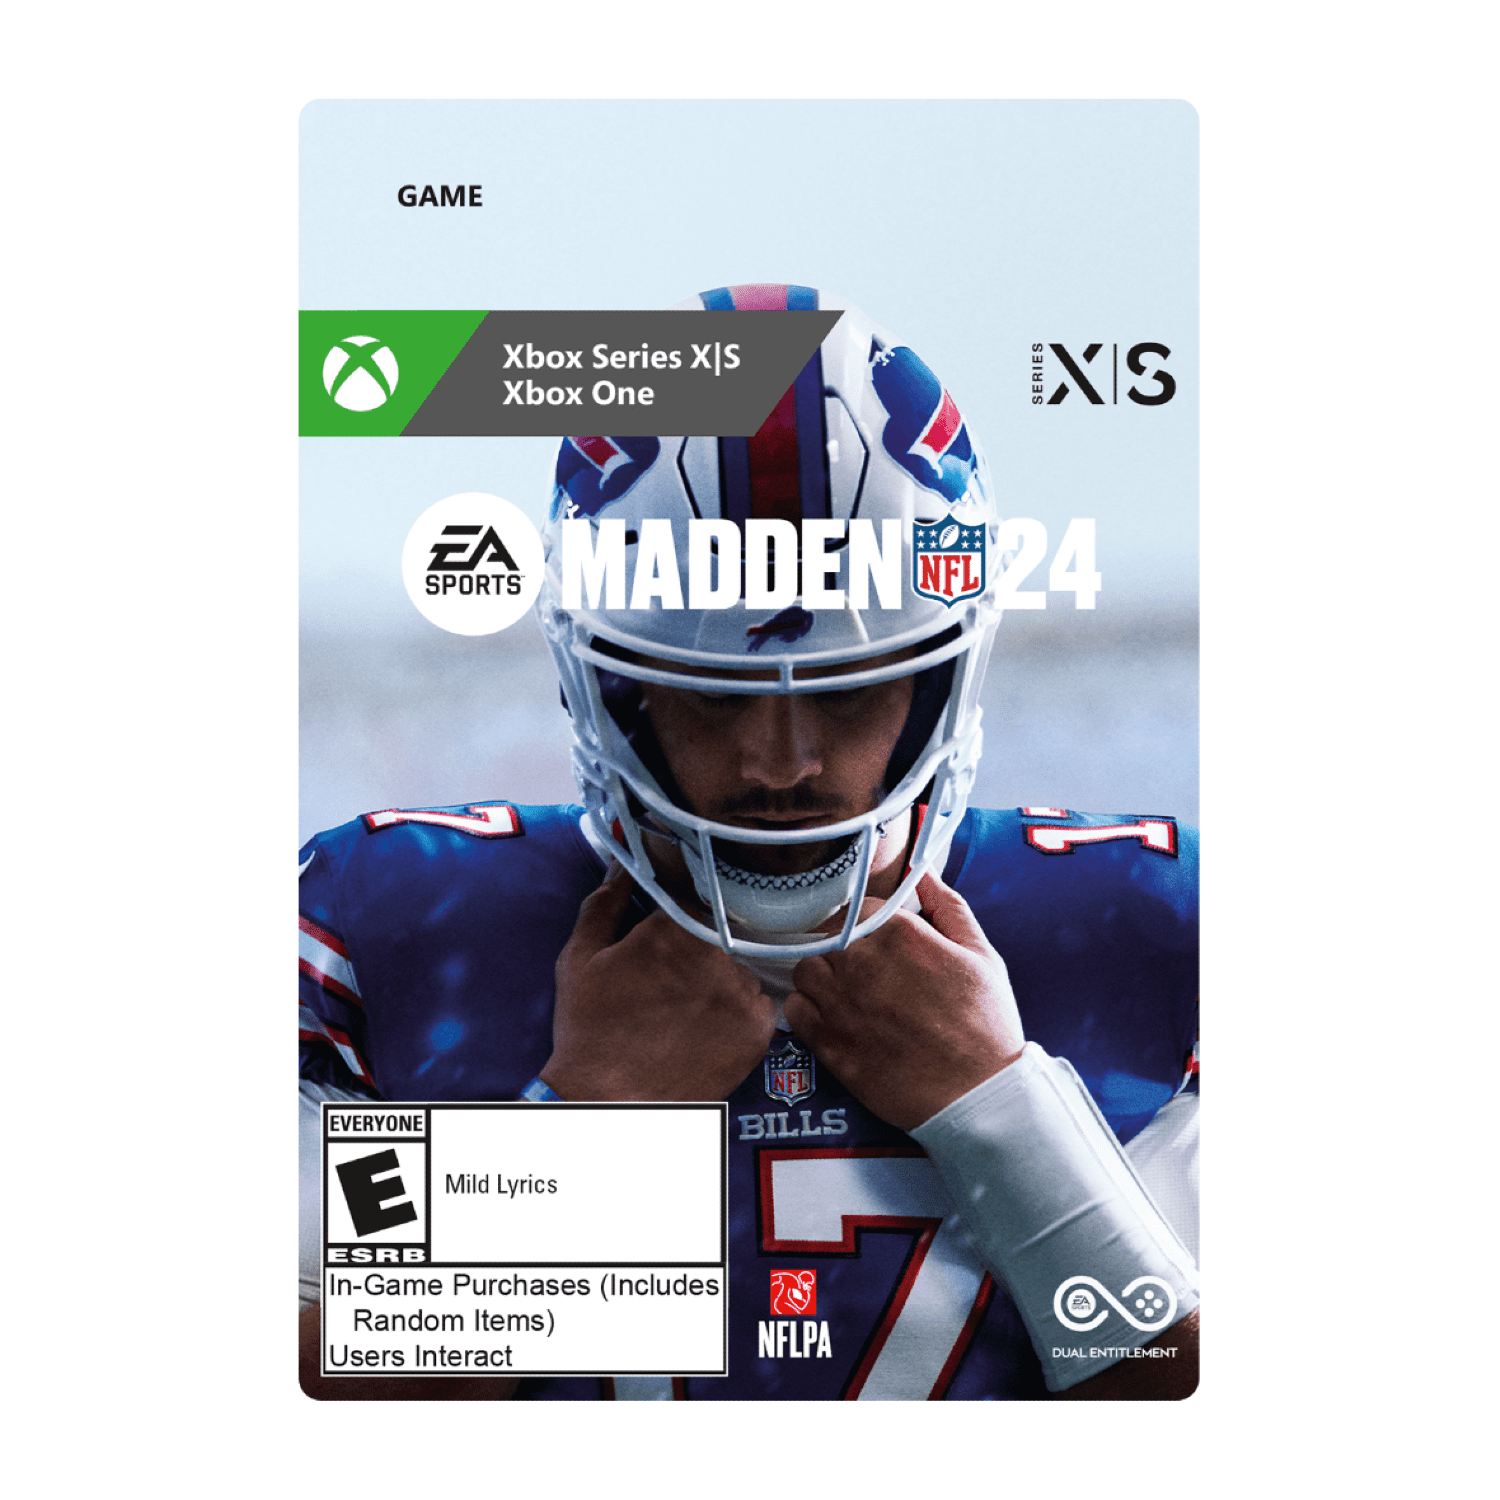 Celebrate The Launch Of Madden 24 With An Exclusive Xbox Series S